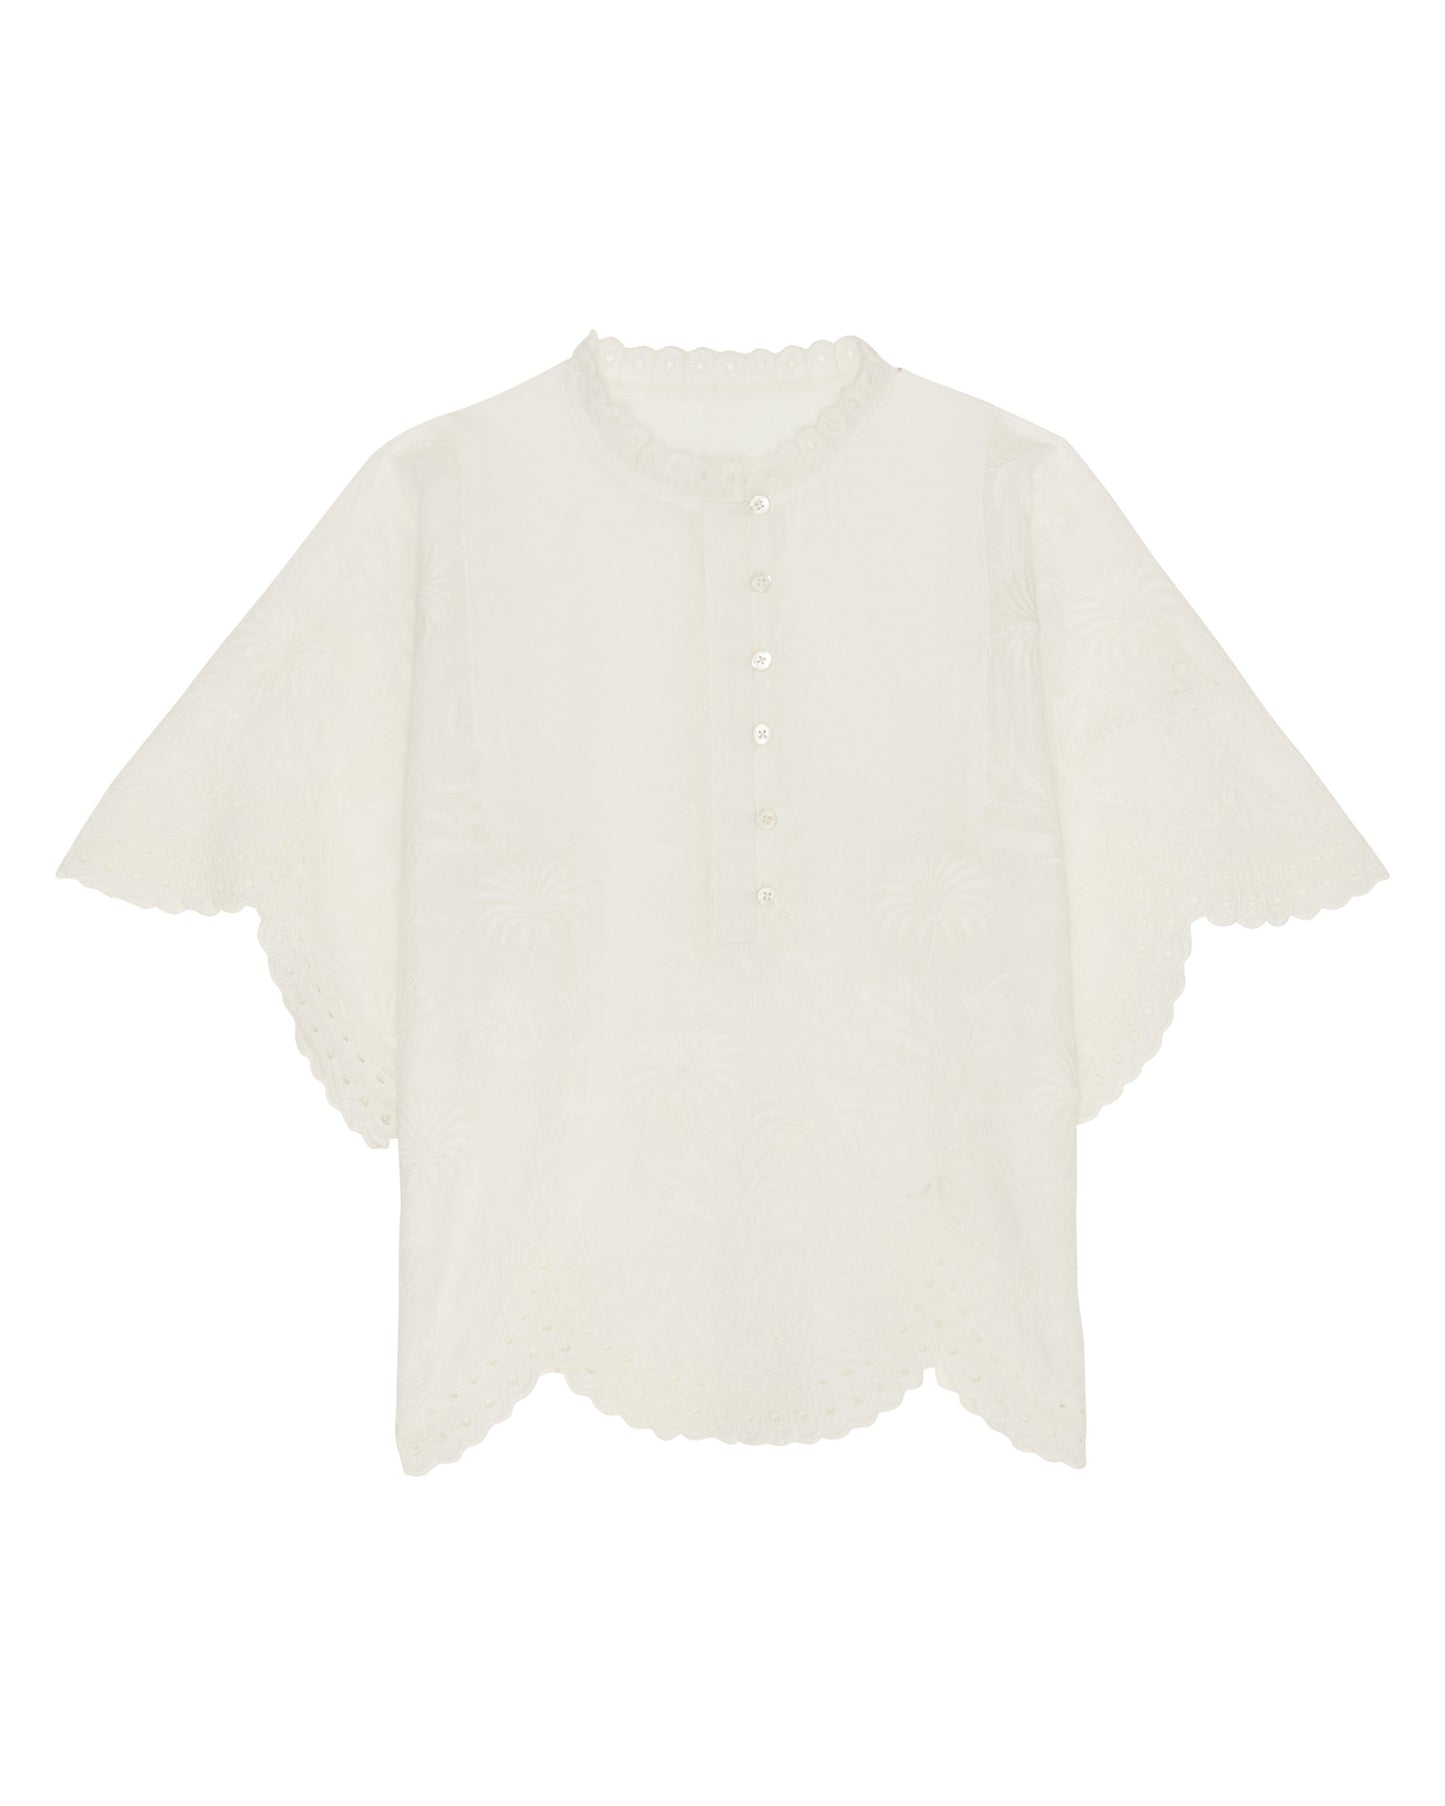 Husco Girls' Off-White Cotton Voile Top